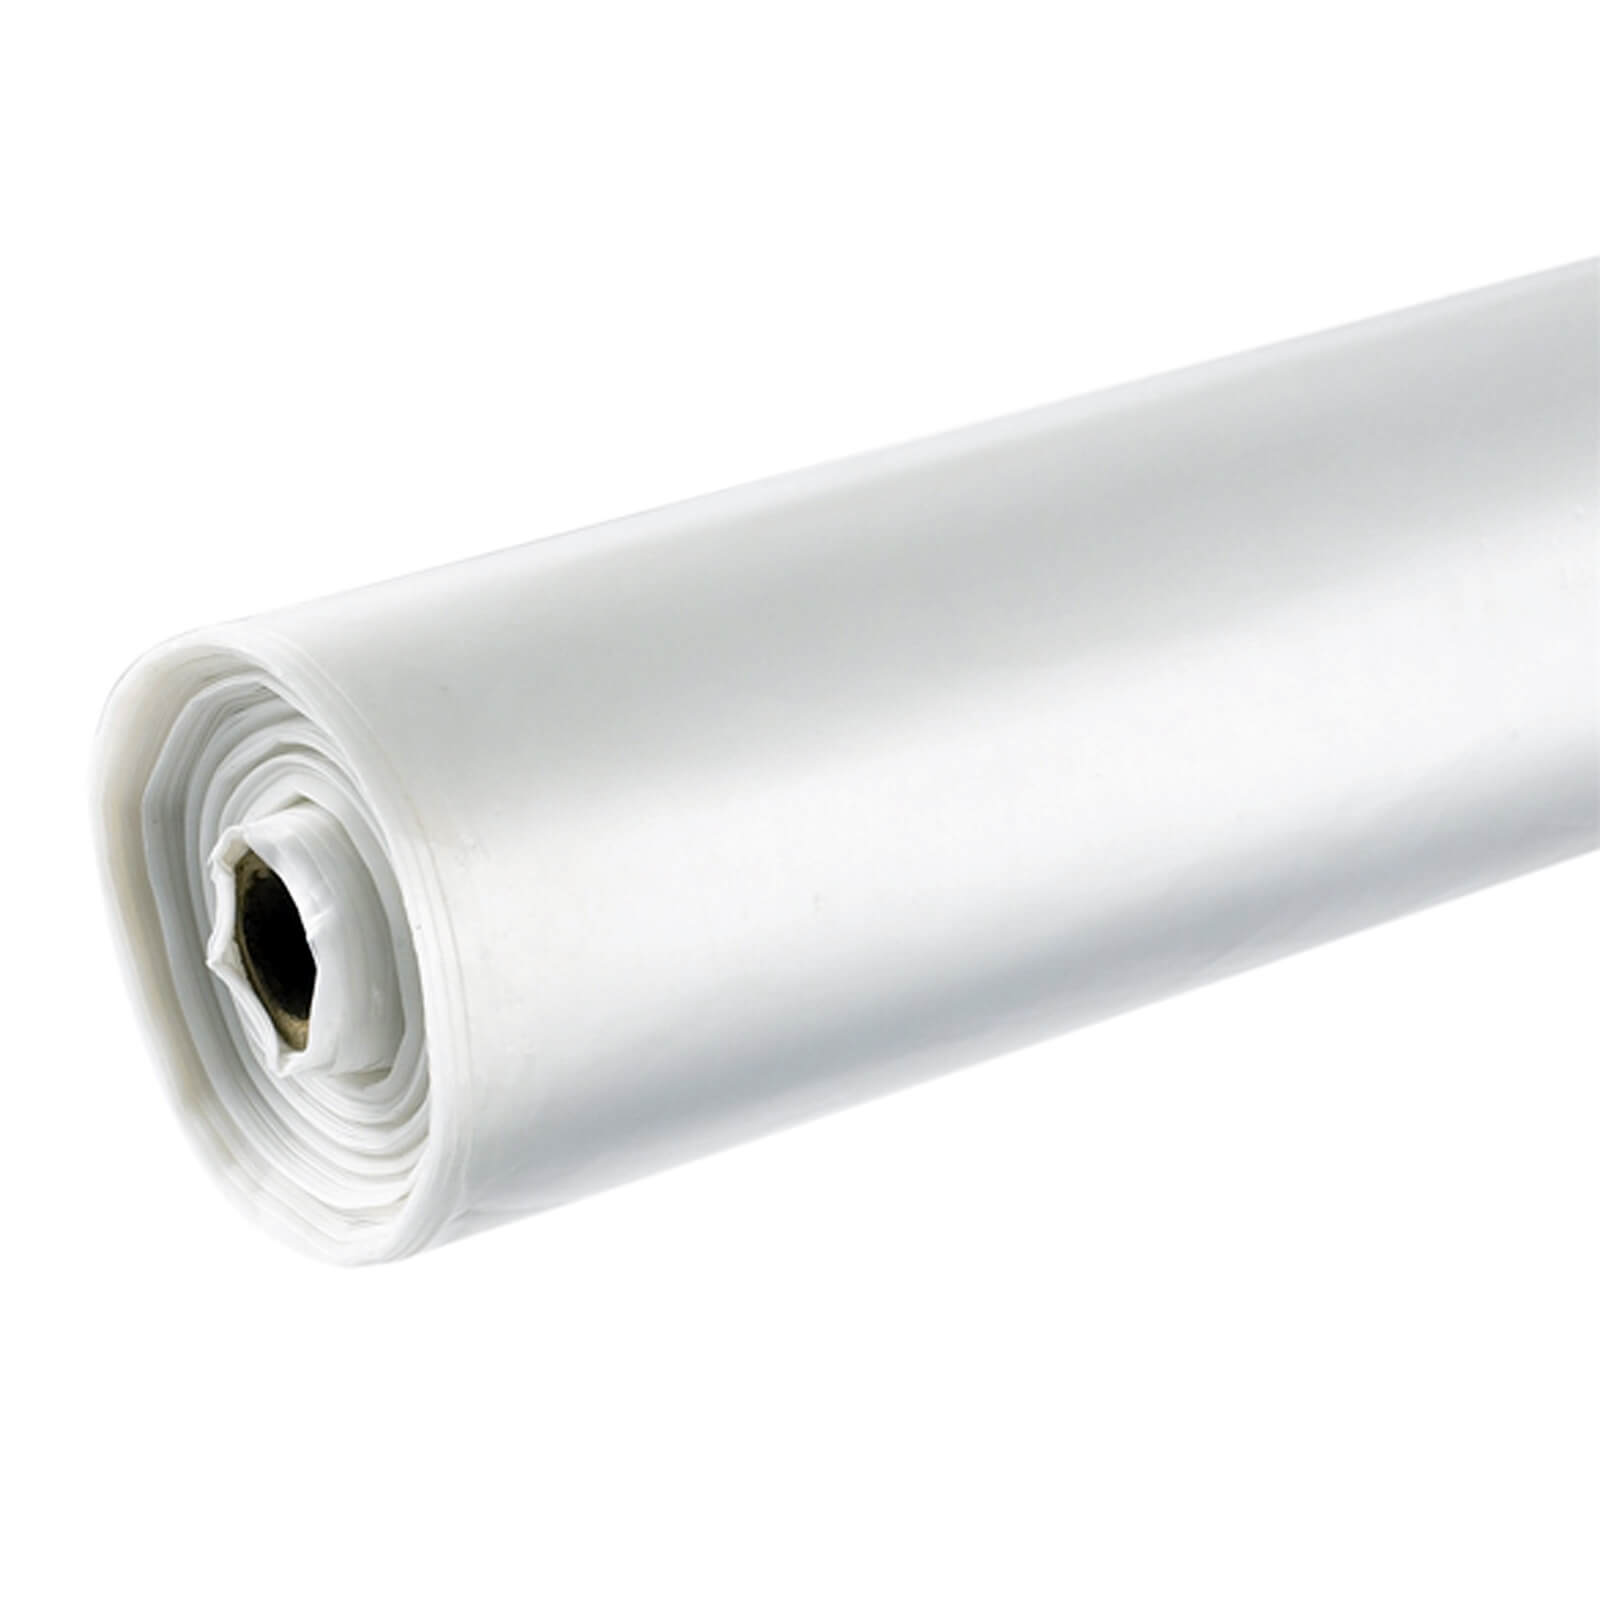 Temporary Protective Sheeting Roll 4m x 25m